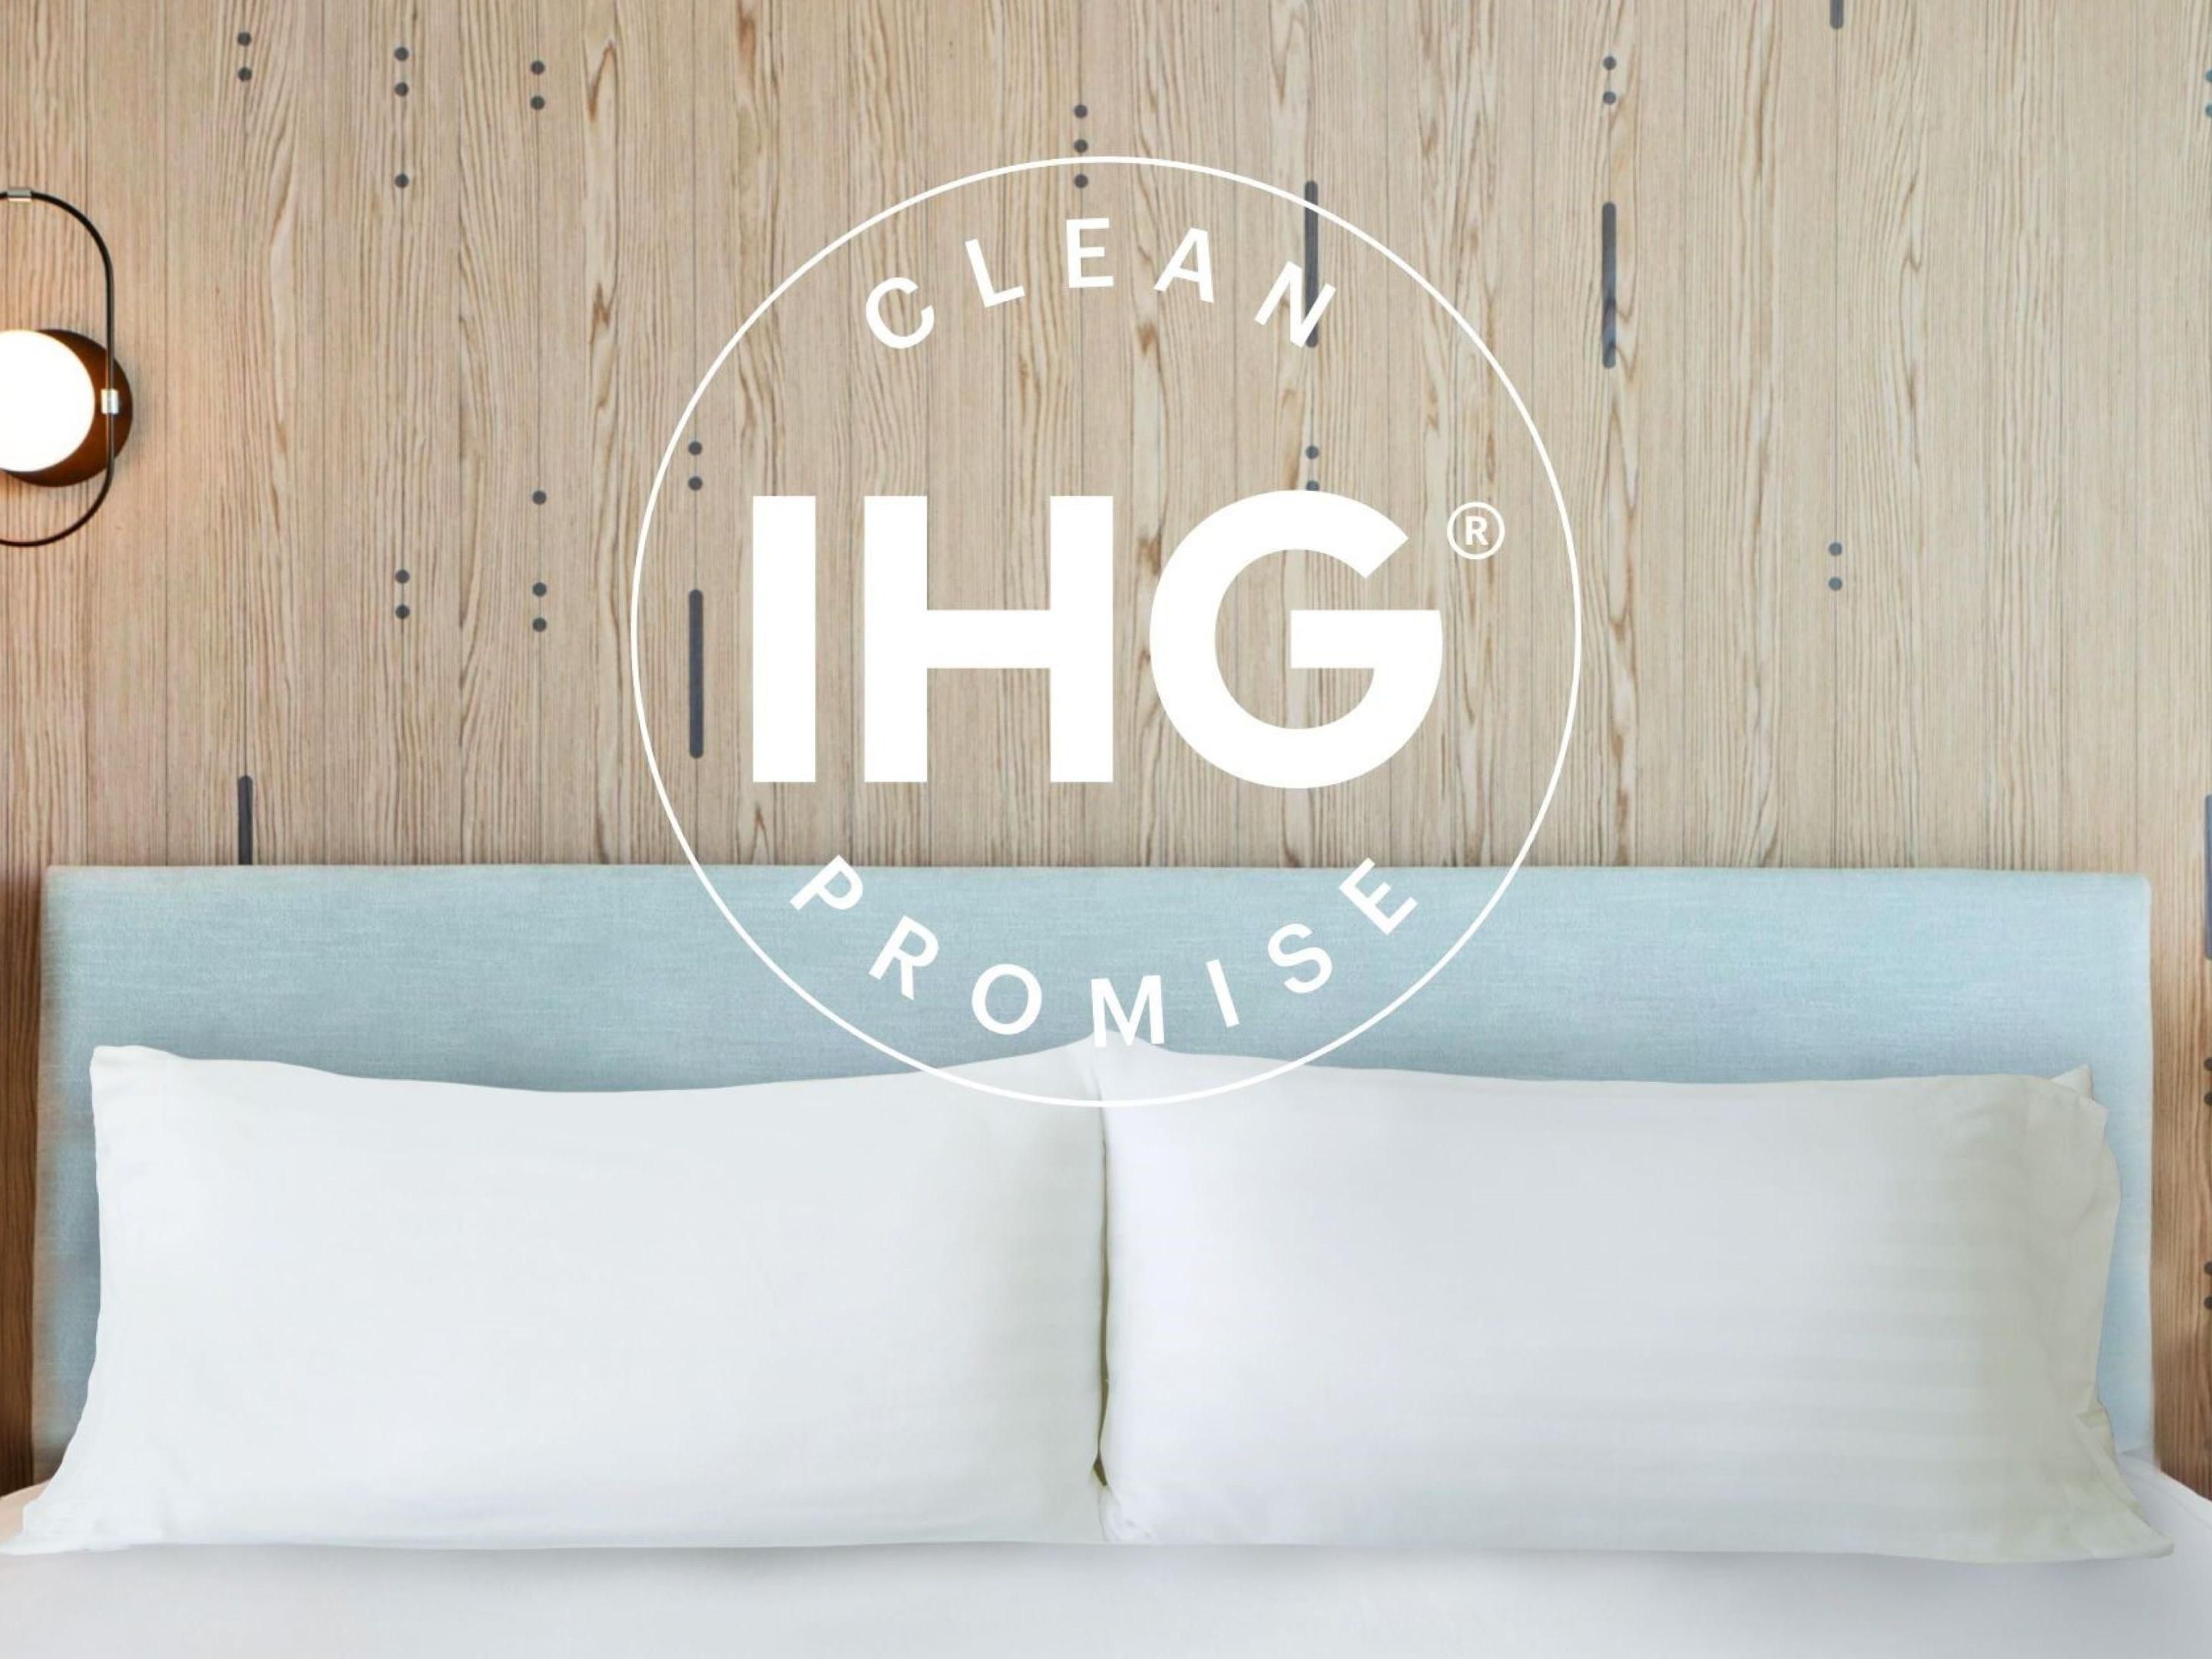 We understand how important cleanliness is to you and as an IHG branded hotel, we deliver the IHG Clean Promise. If your room is not cleaned to your satisfaction, please contact the Front Desk immediately – we promise to make it right – that is the IHG Clean Promise.
